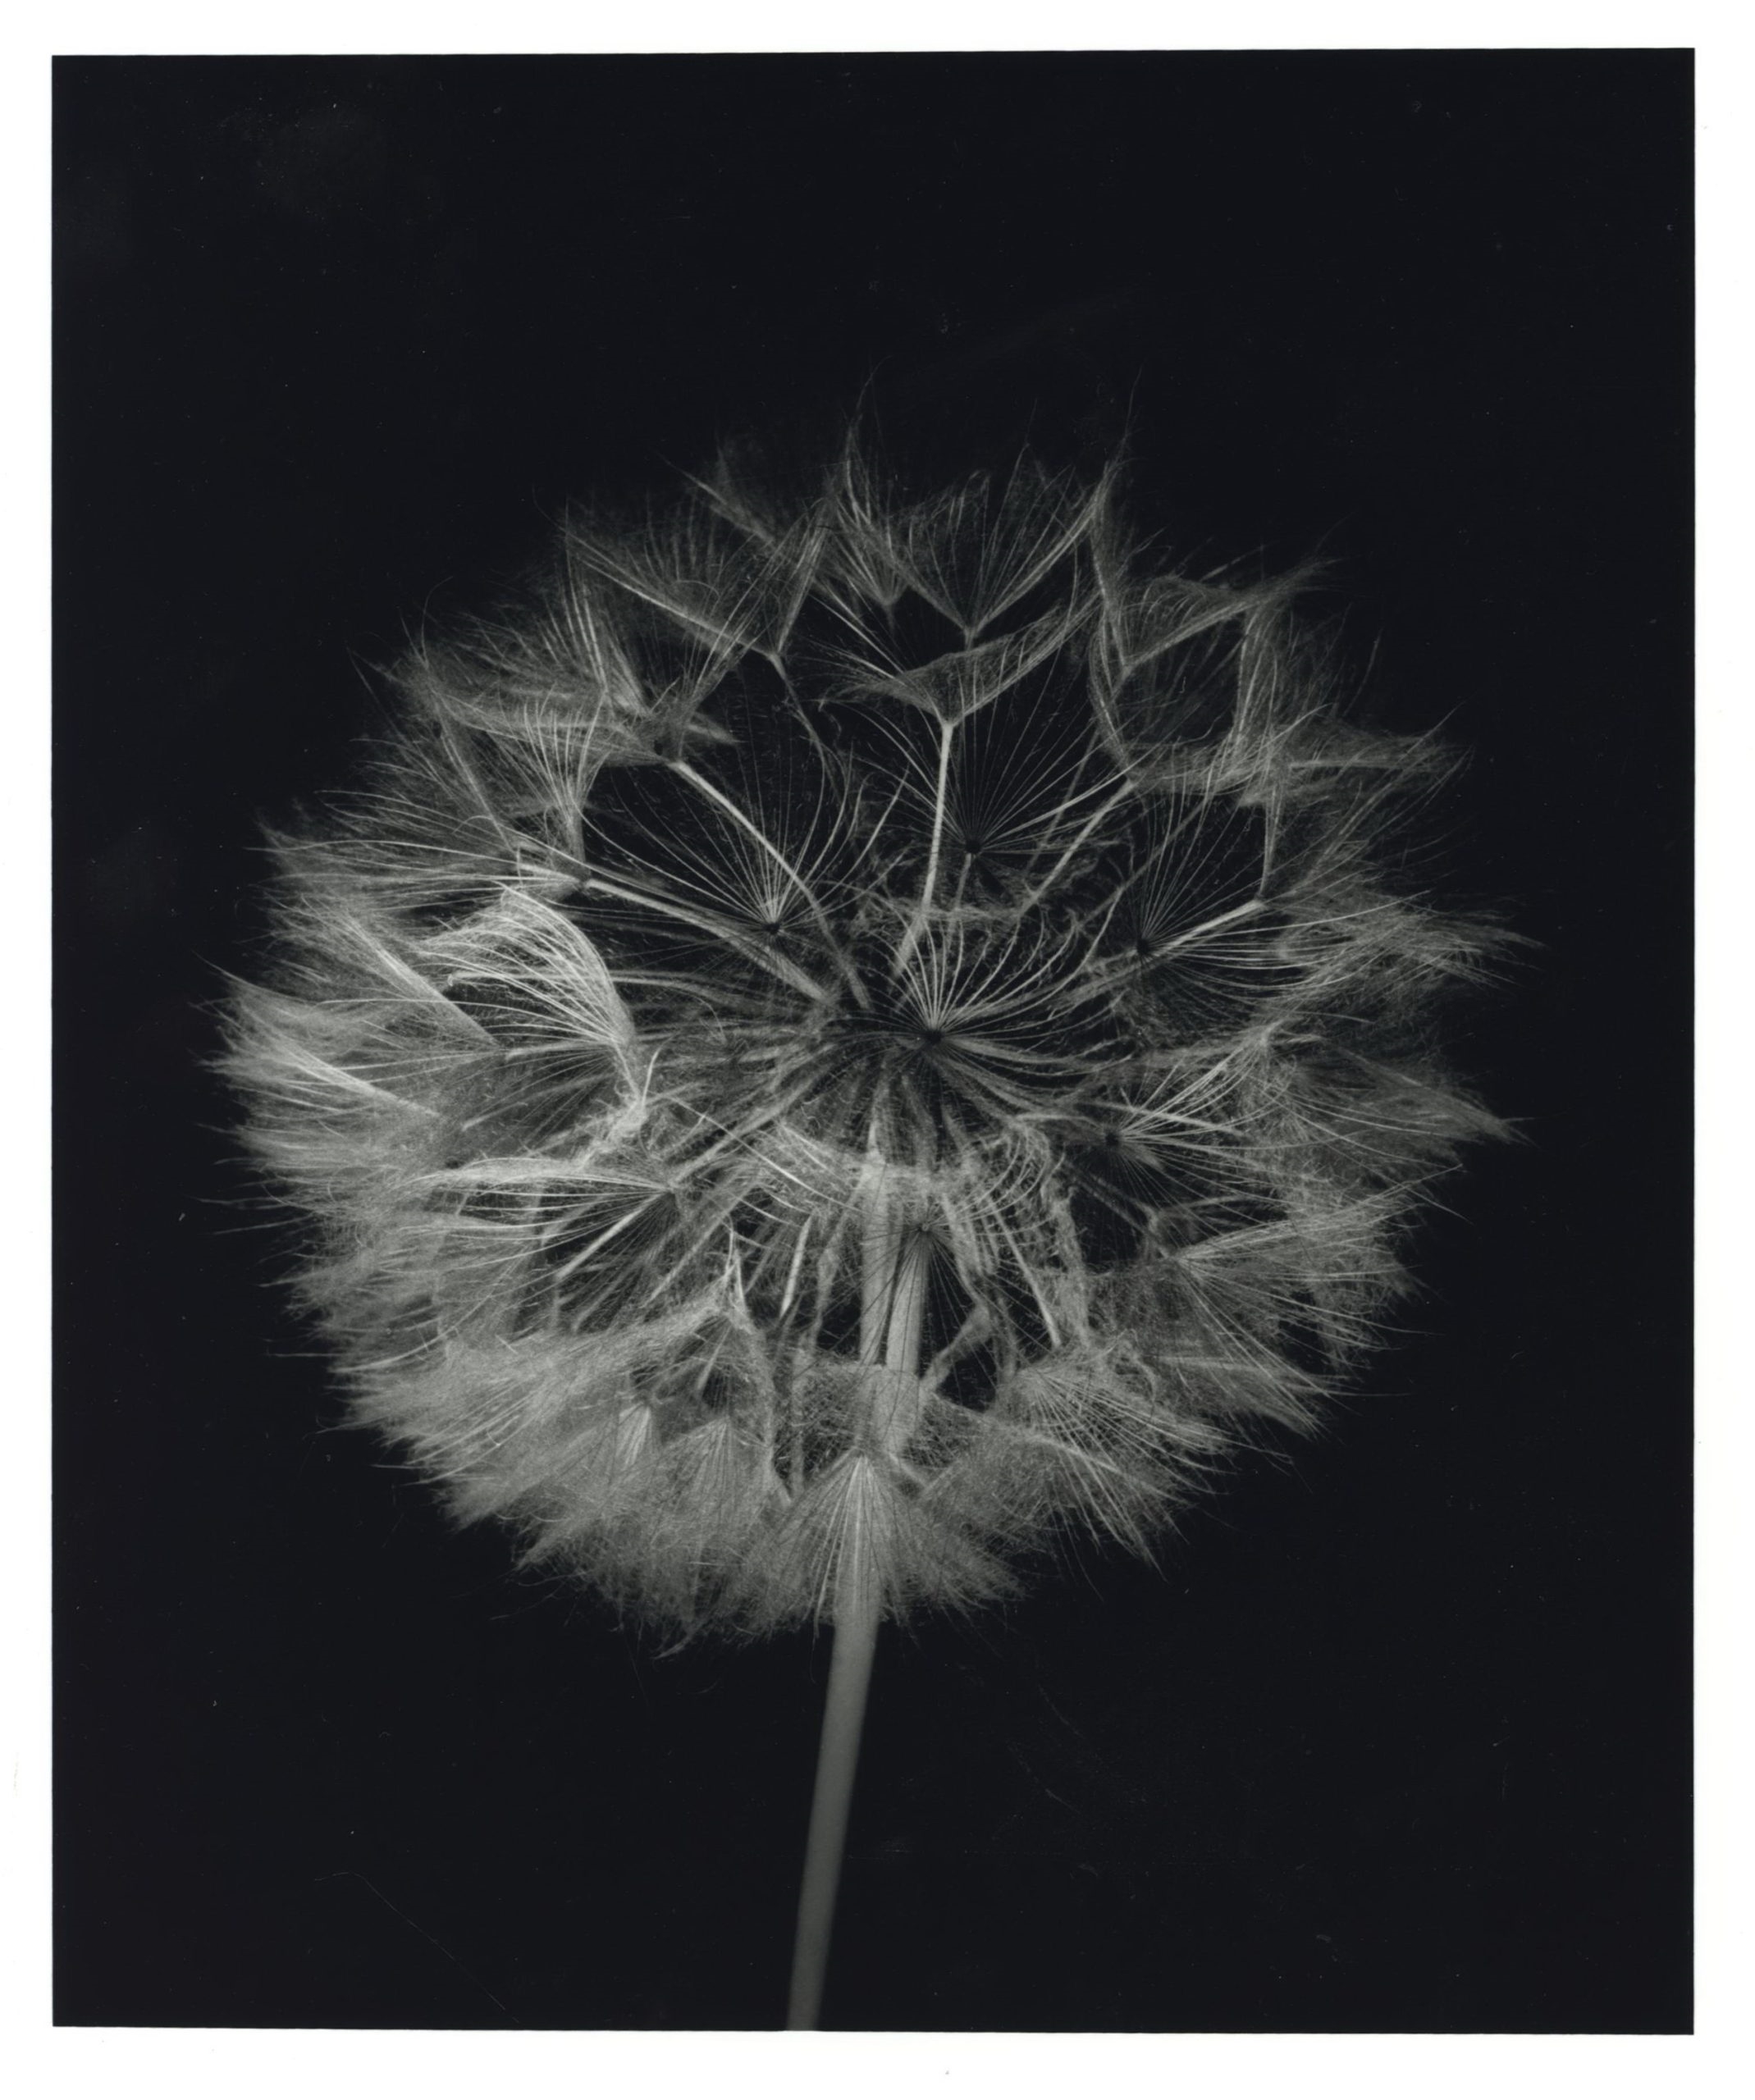 Seed Head by Olive Cotton, 1990